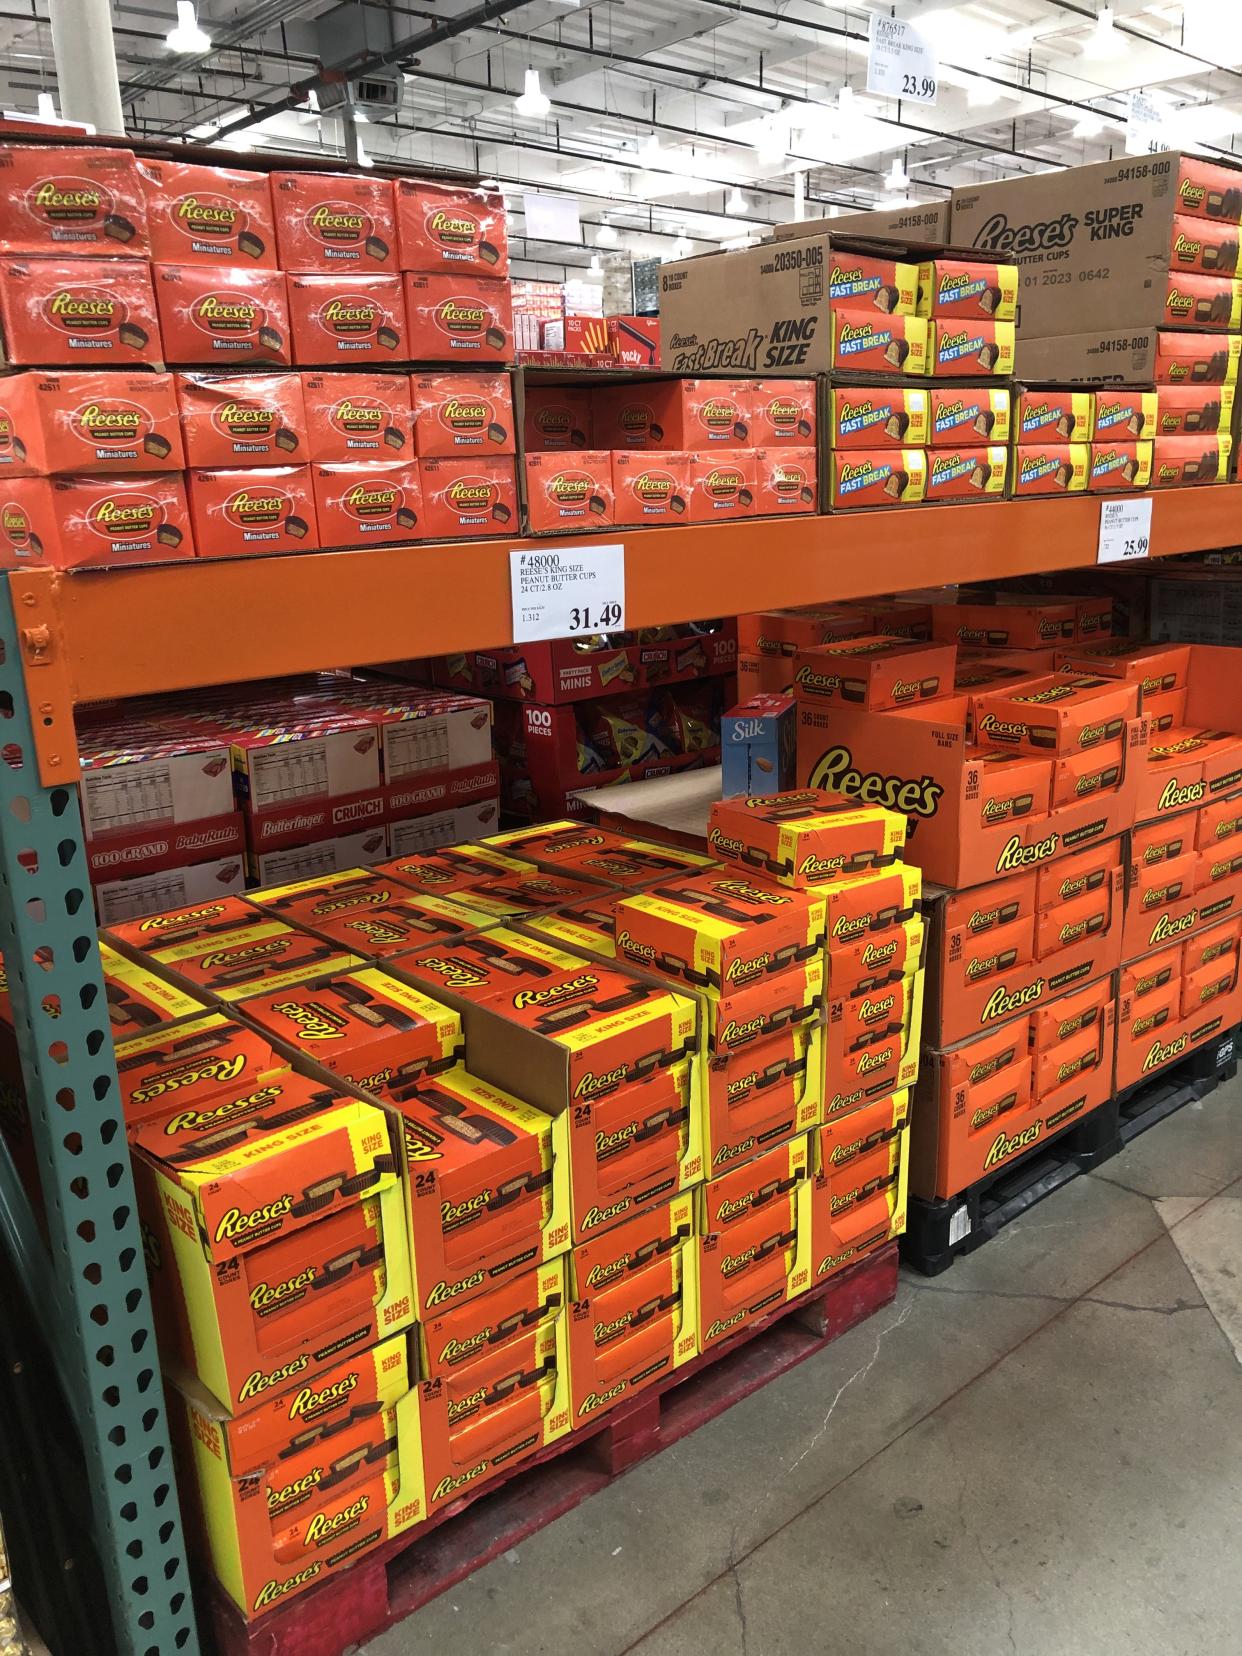 Many plus-sized packages of Reese's candy products are shown stacked at a Costco Business Center